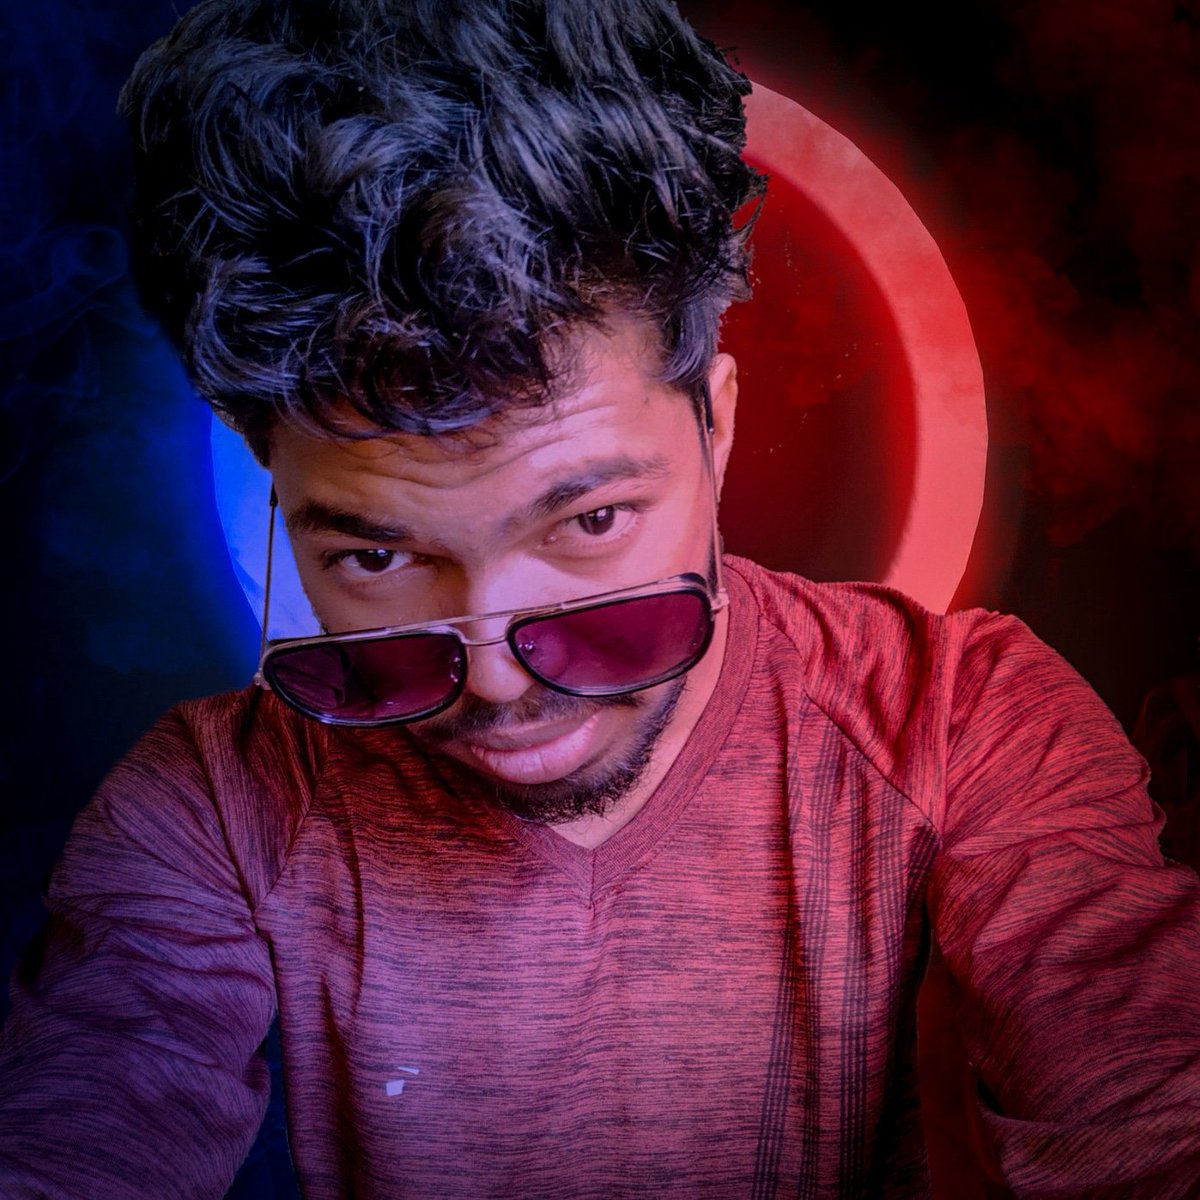 Made with @Photoshop and @Lightroom #lockdown #Covid_19 #PhotoshopChallenge #ringlight #blue #red #dualtone #lightroom #selfie